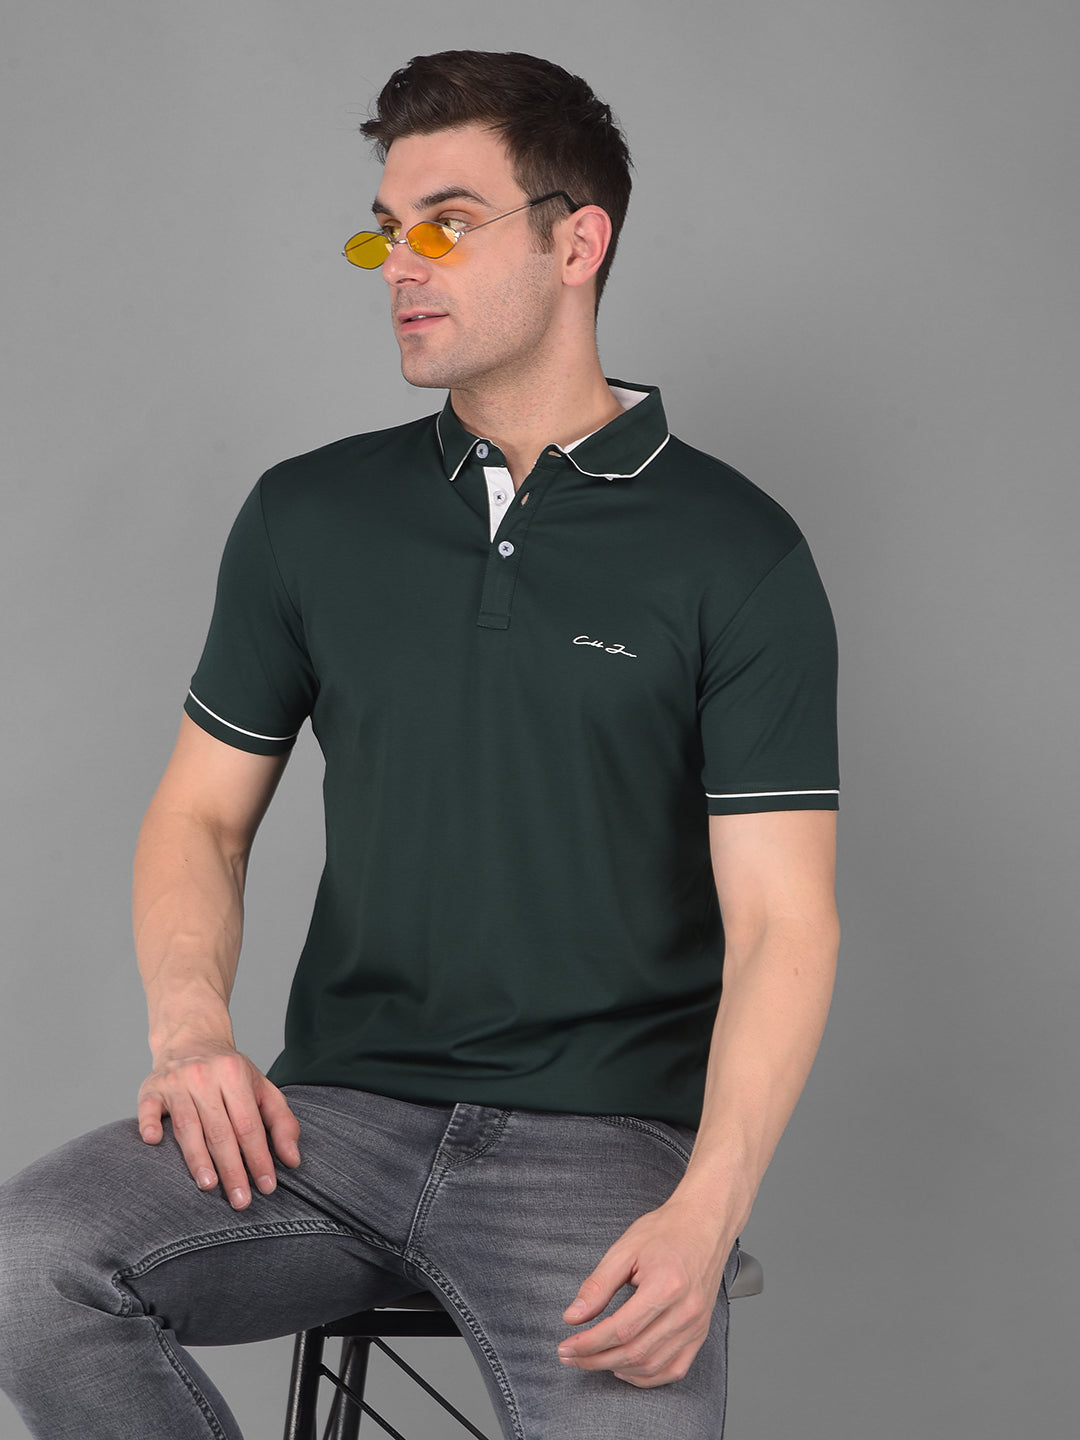 COBB SOLID BOTTLE GREEN POLO NECK T-SHIRT